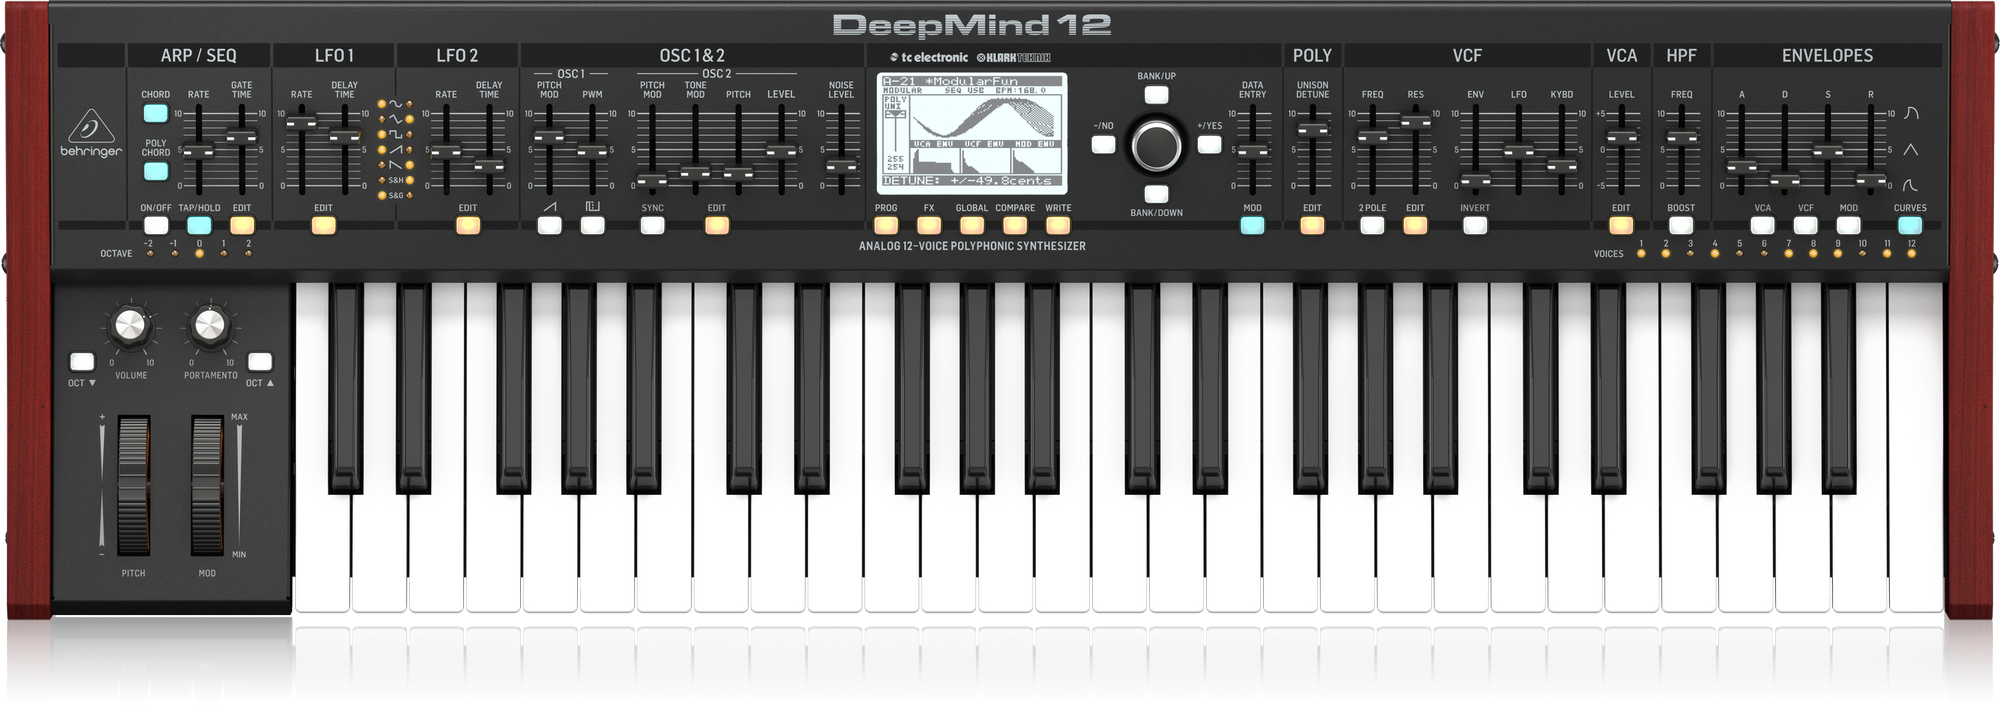 Behringer Synthesizers and Samplers DEEPMIND 12